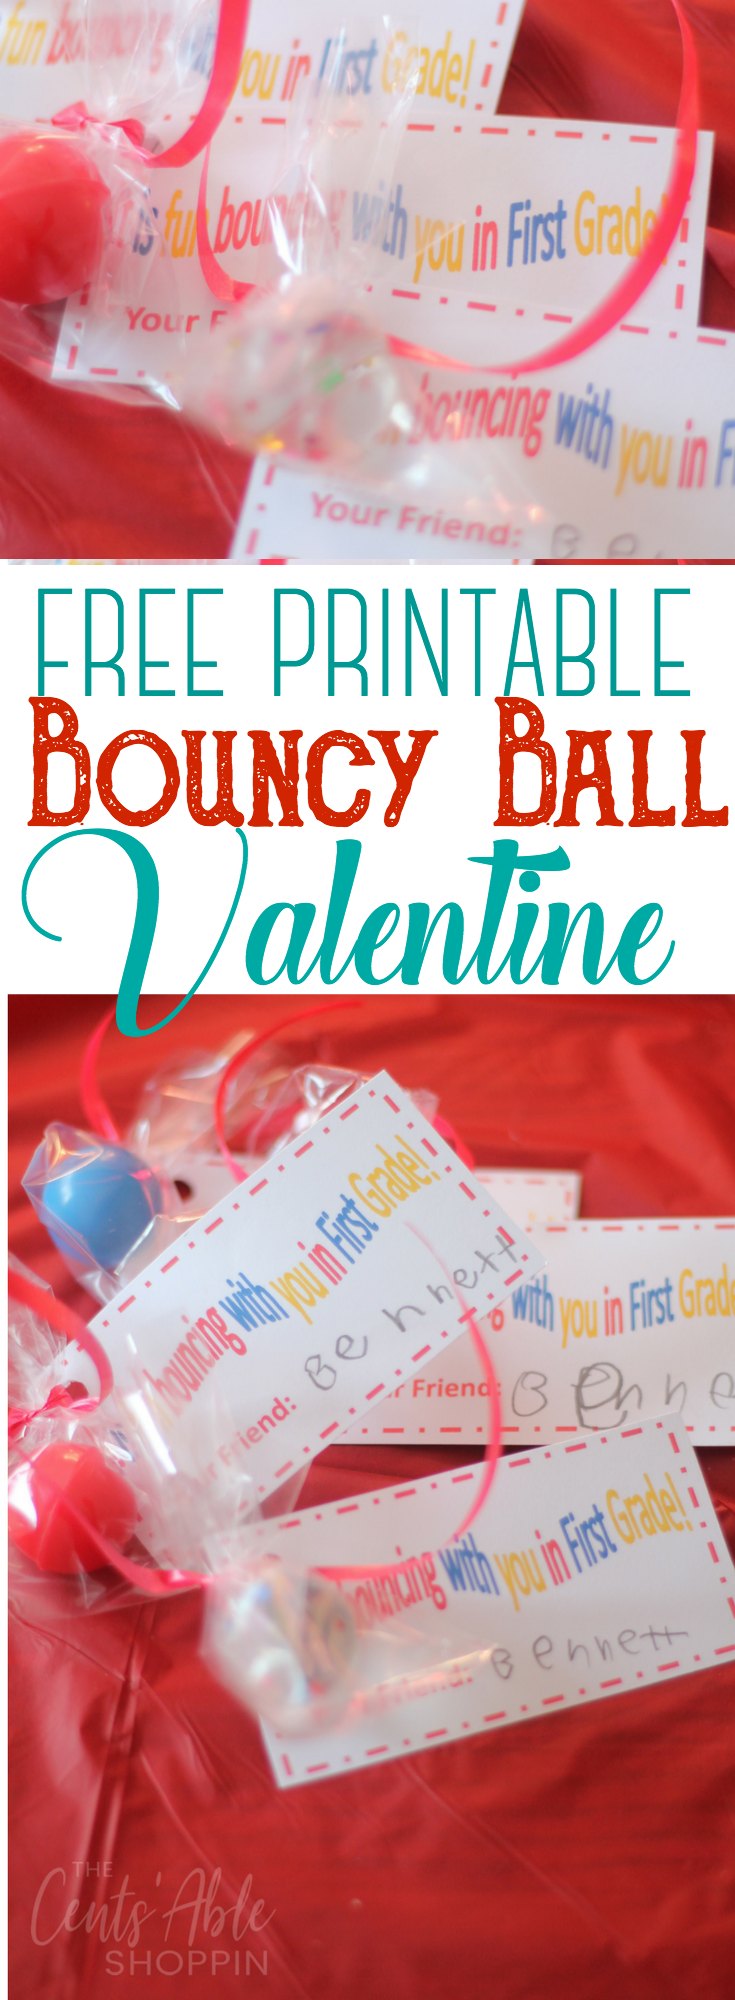 This adorable bouncy ball Valentine is easy to put together and a unique way for boys and girls to celebrate Valentine's Day with friends and family!